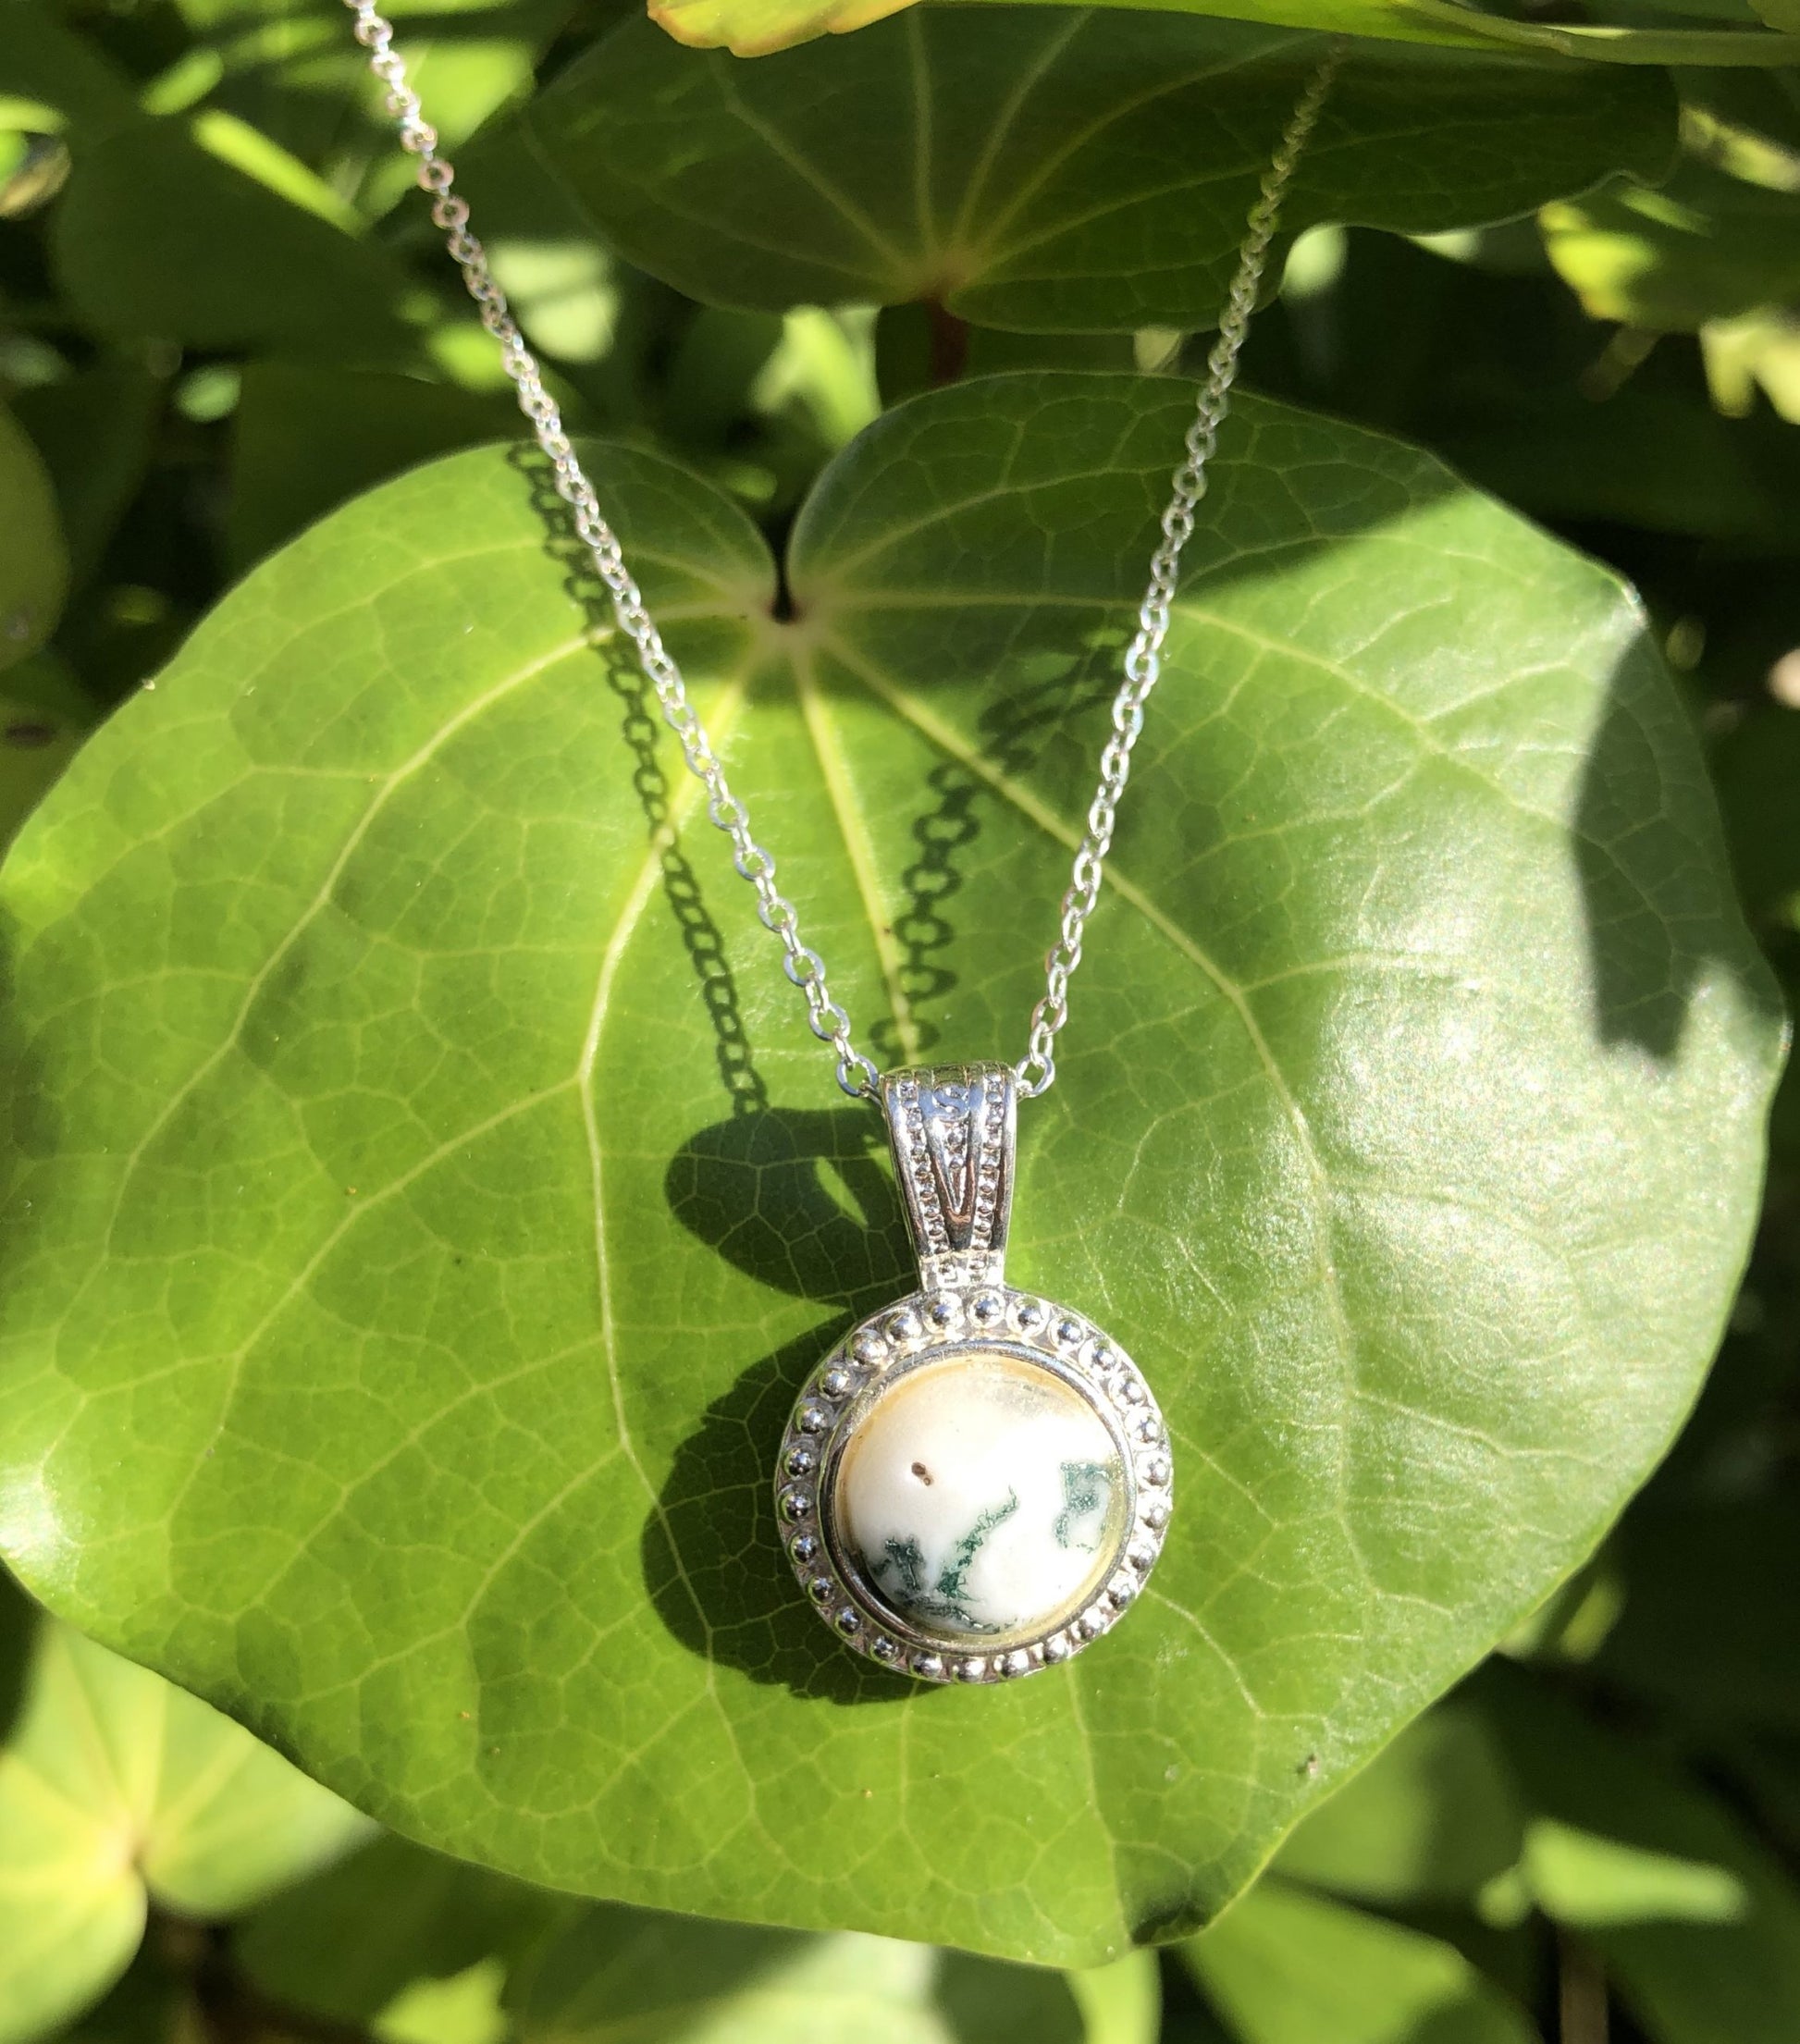 Necklace with natural Tree-Agate showing dark green moss on a bright white background, hand polished to a 10mm round cabochon and set in a silver plated setting with 19 inch chain, on leaf